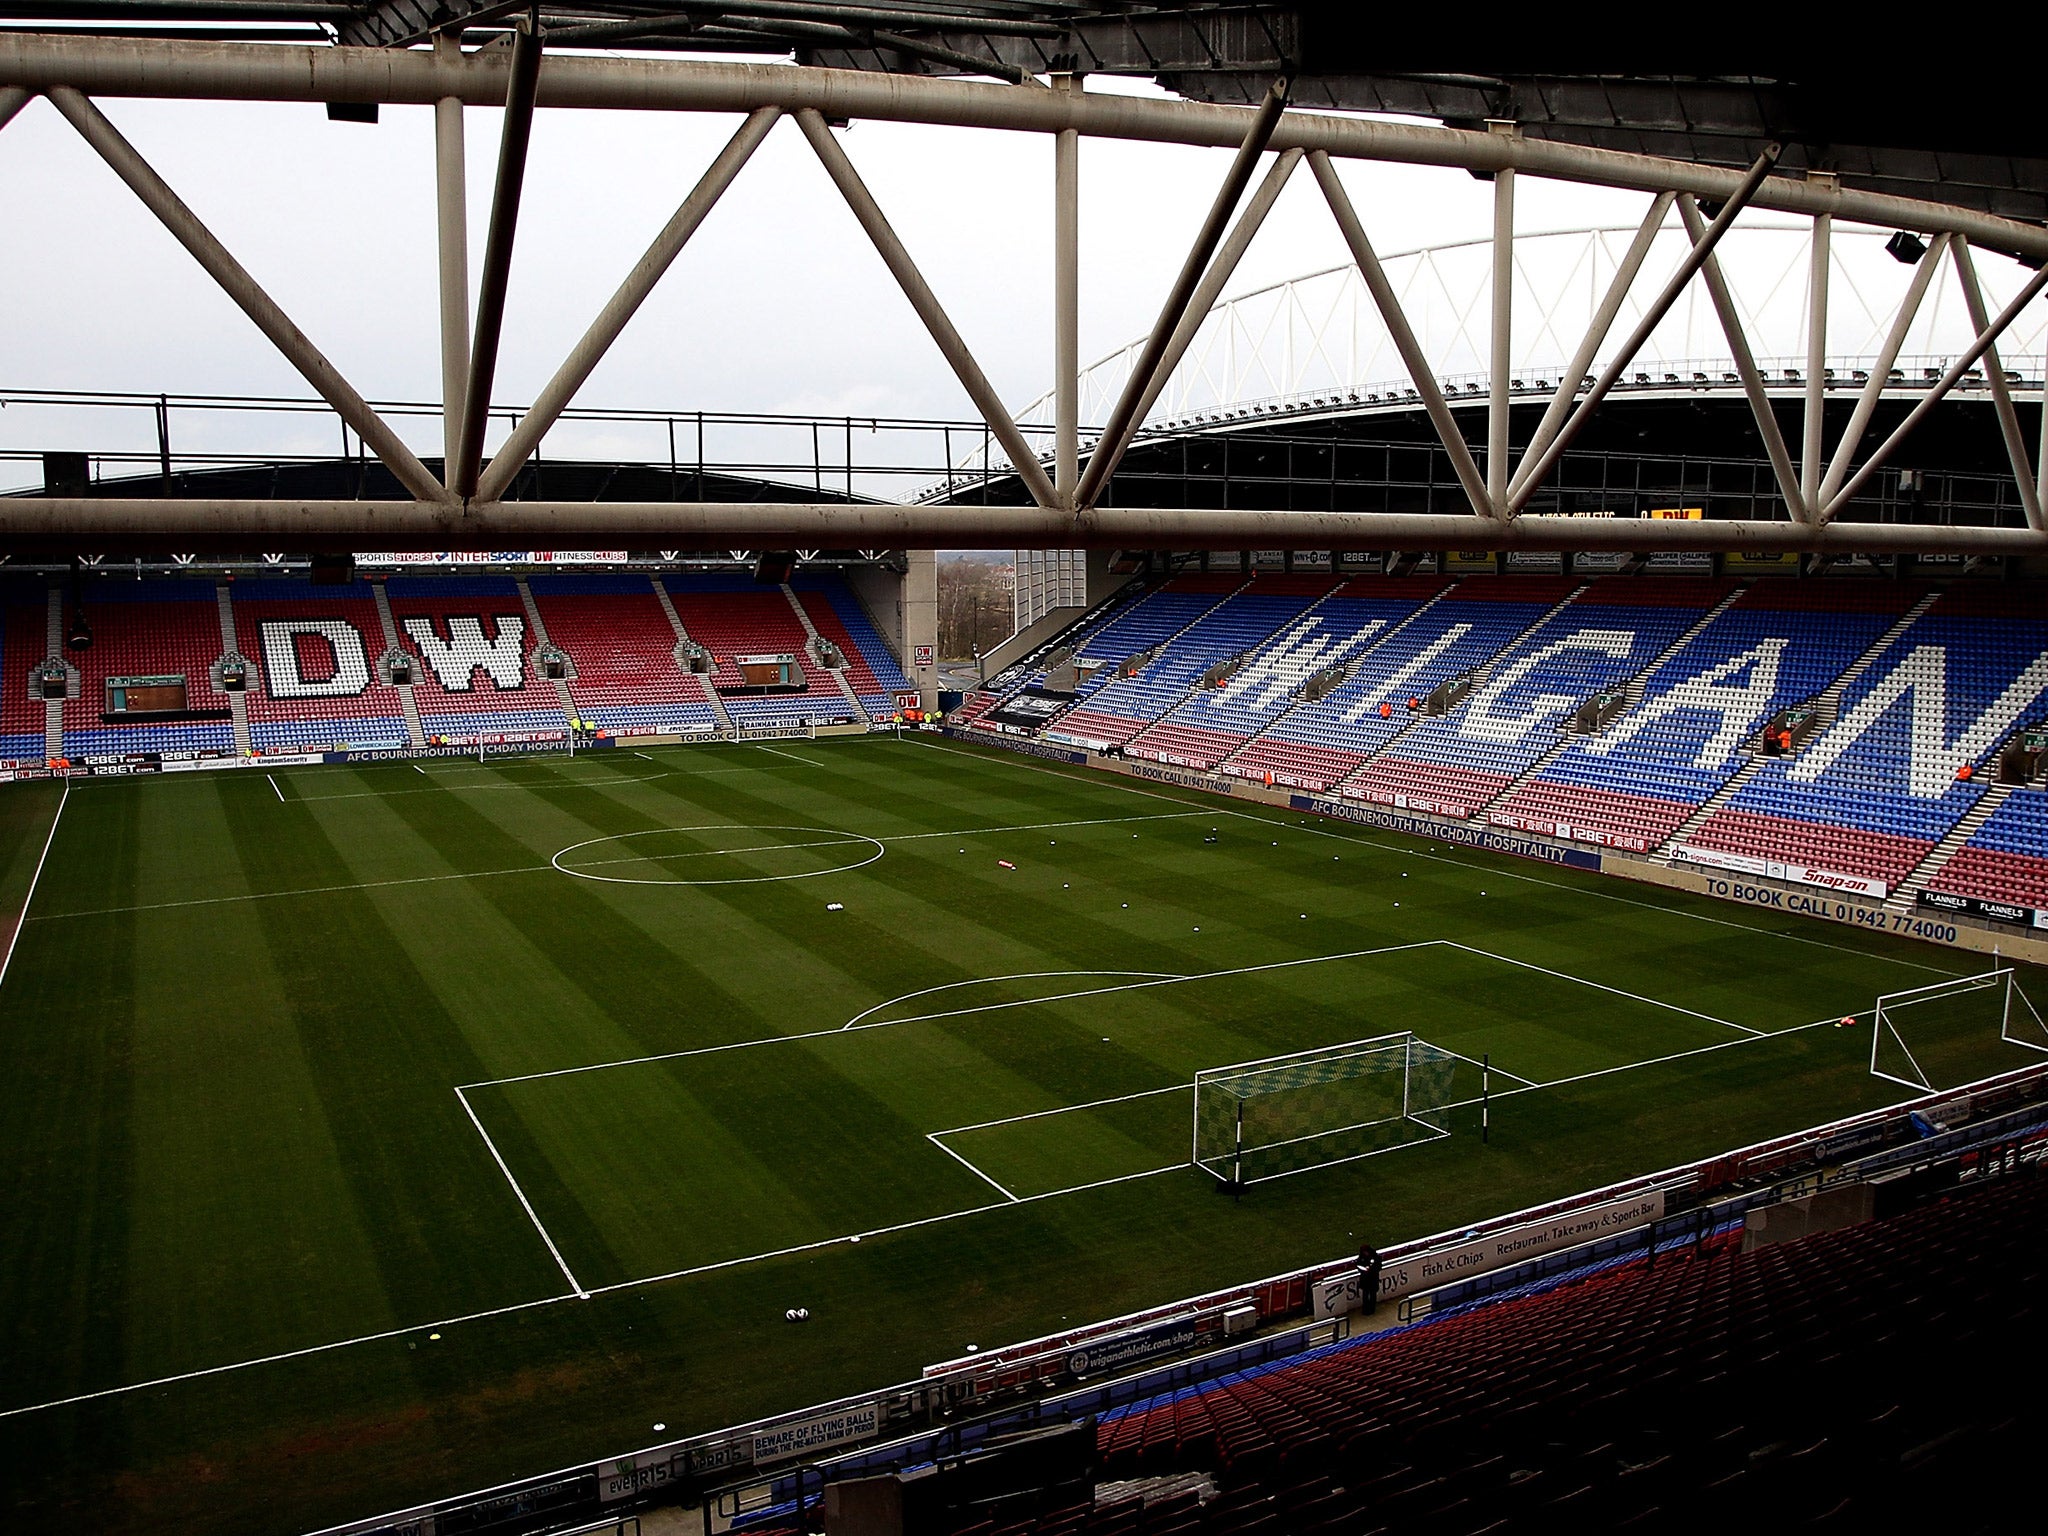 Wigan's DW Stadium could be another option for Liverpool